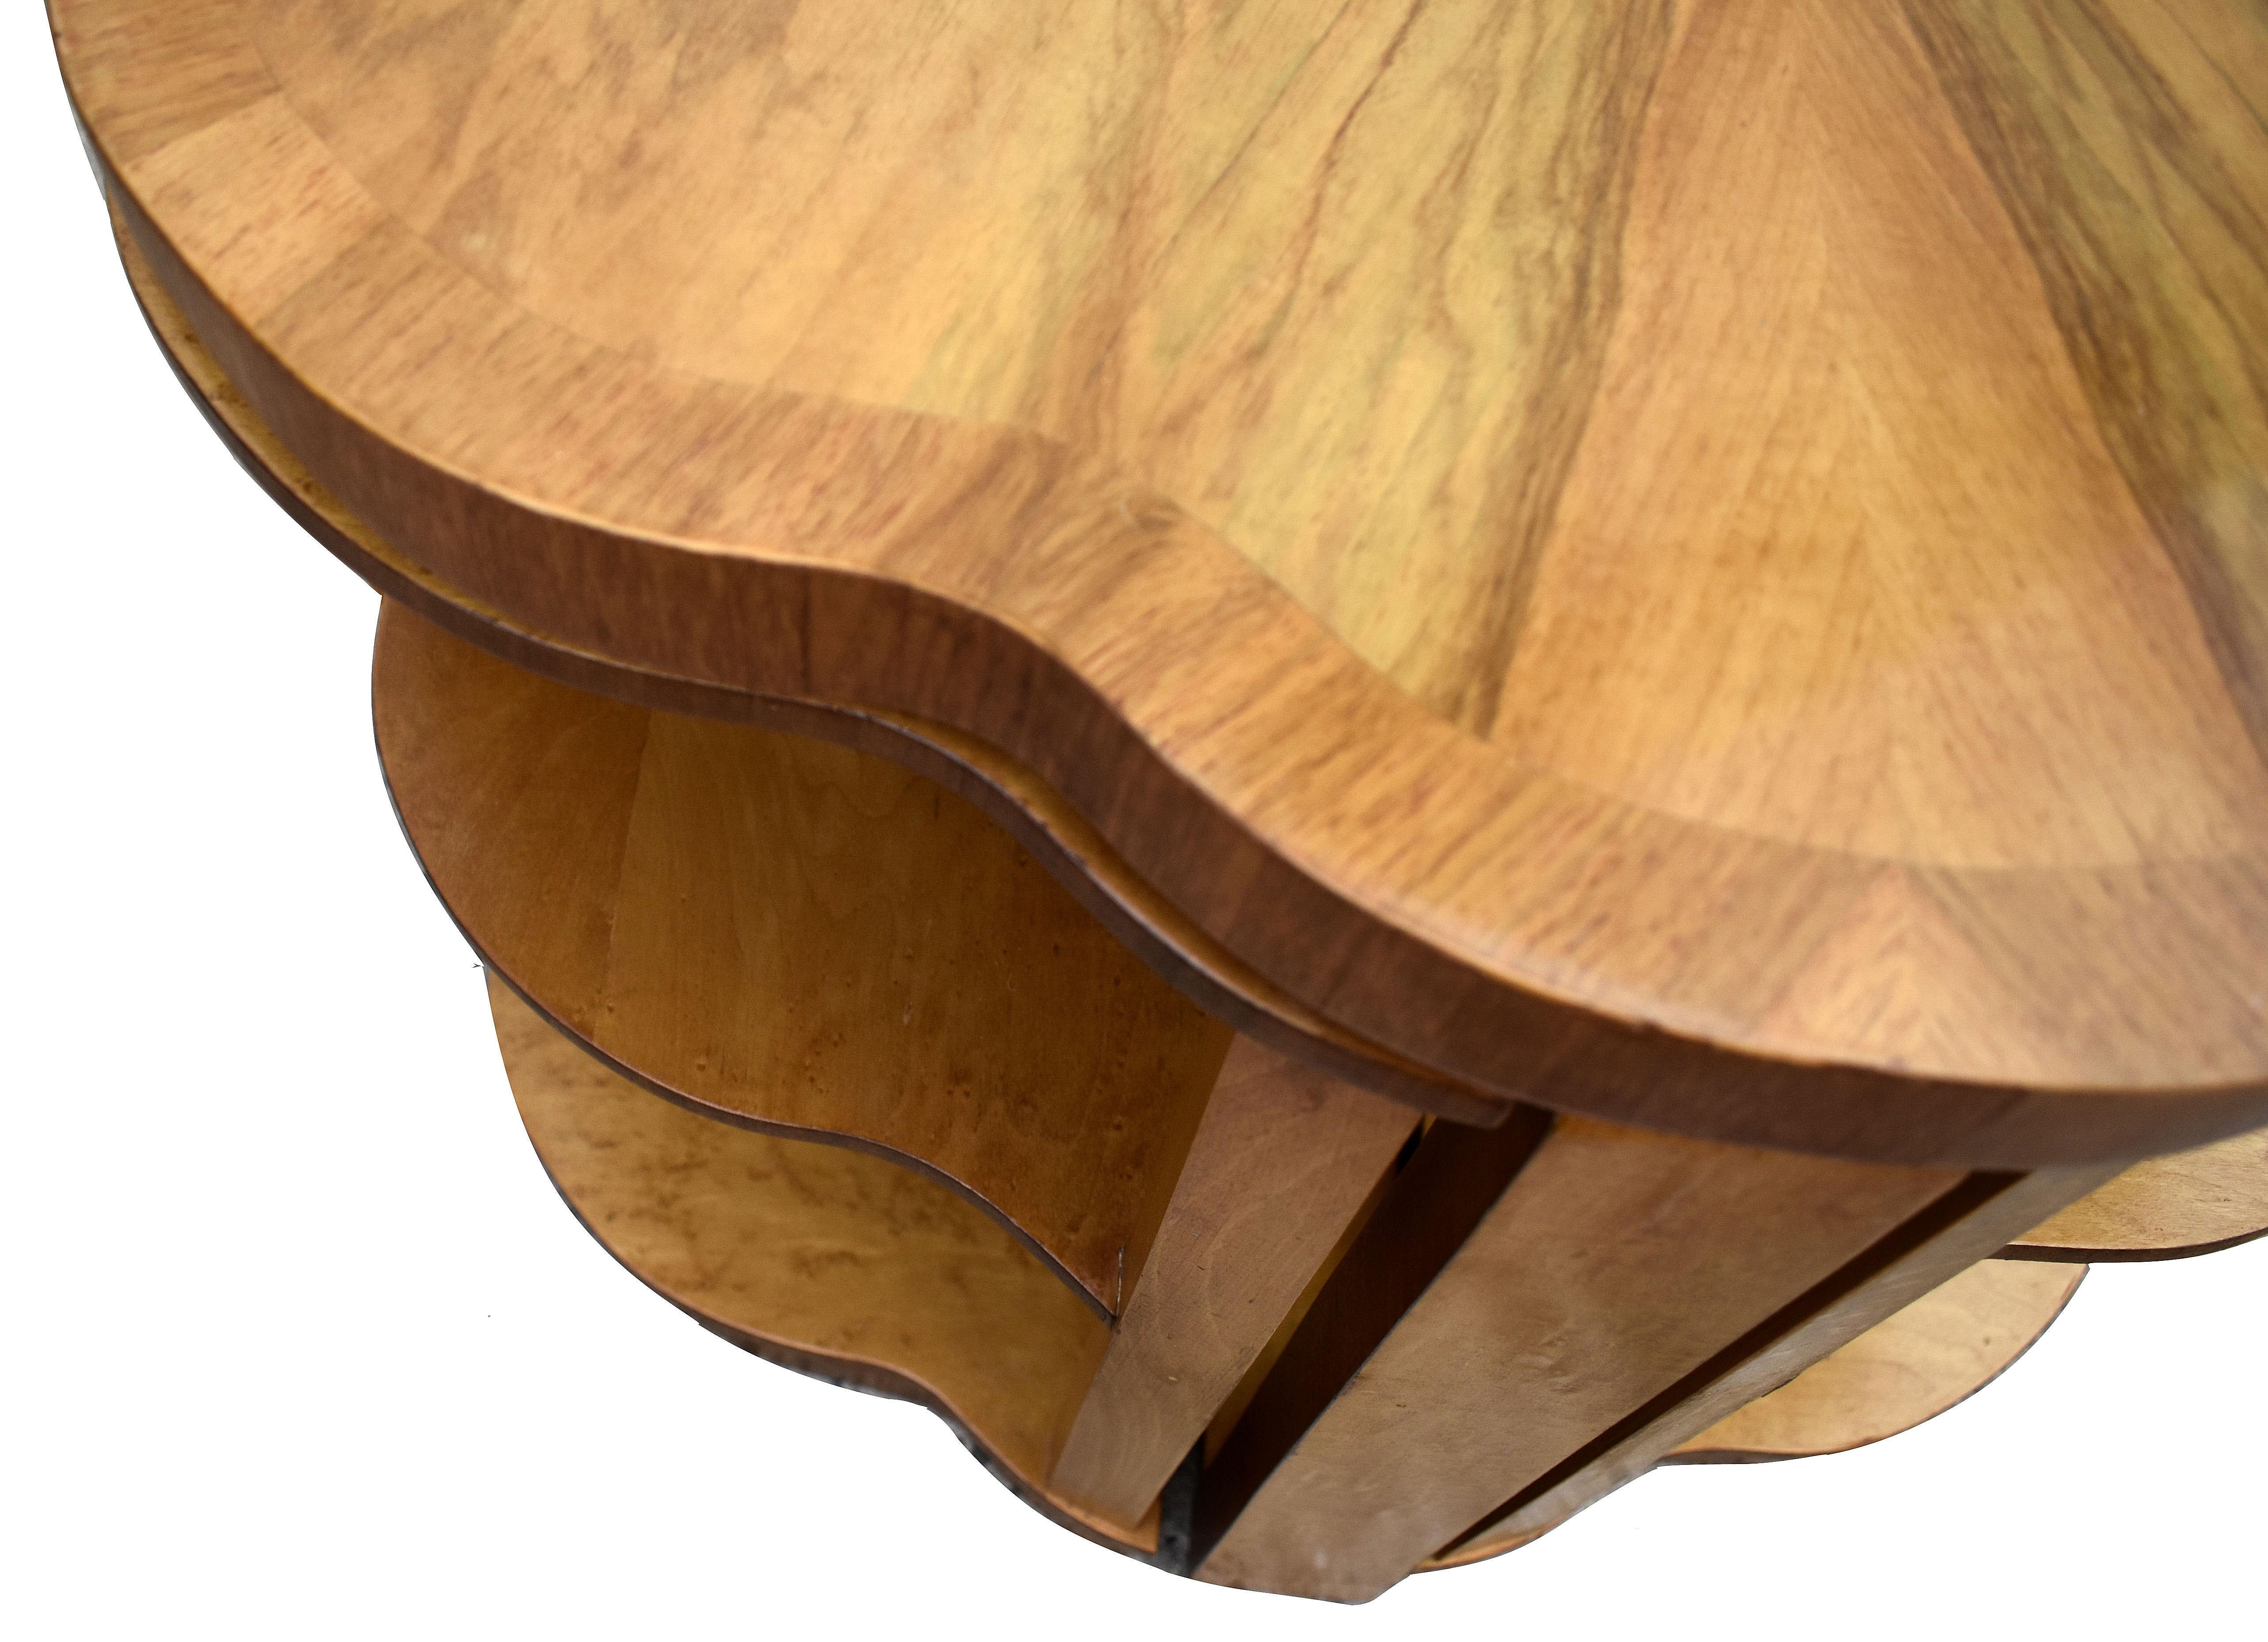 Art Deco High Quality Walnut & Maple Nest of 5 Tables by Epstein, English, 1930 In Good Condition For Sale In Devon, England